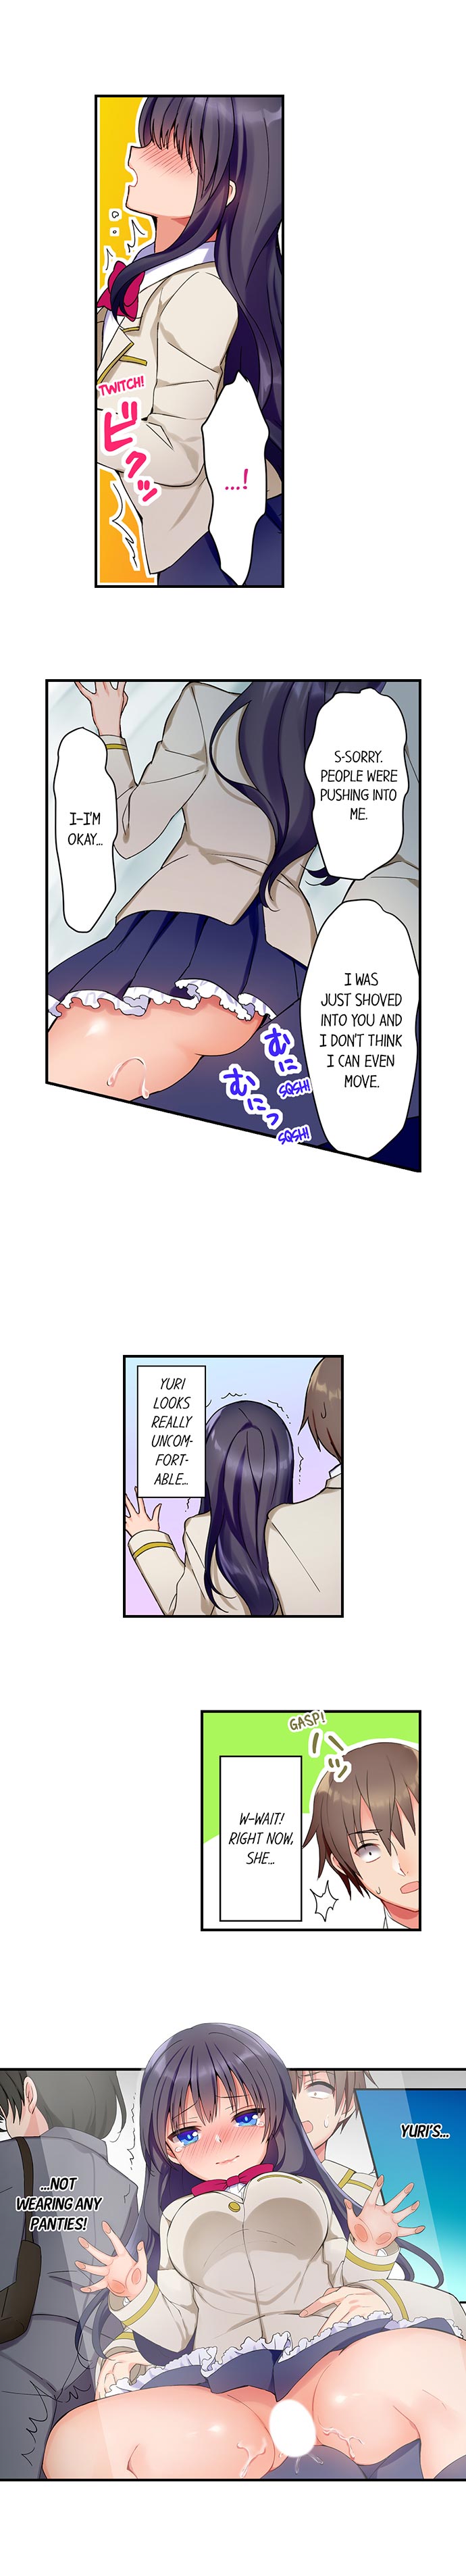 Cool Miss Yuri is a Squirter - Chapter 4 Page 8